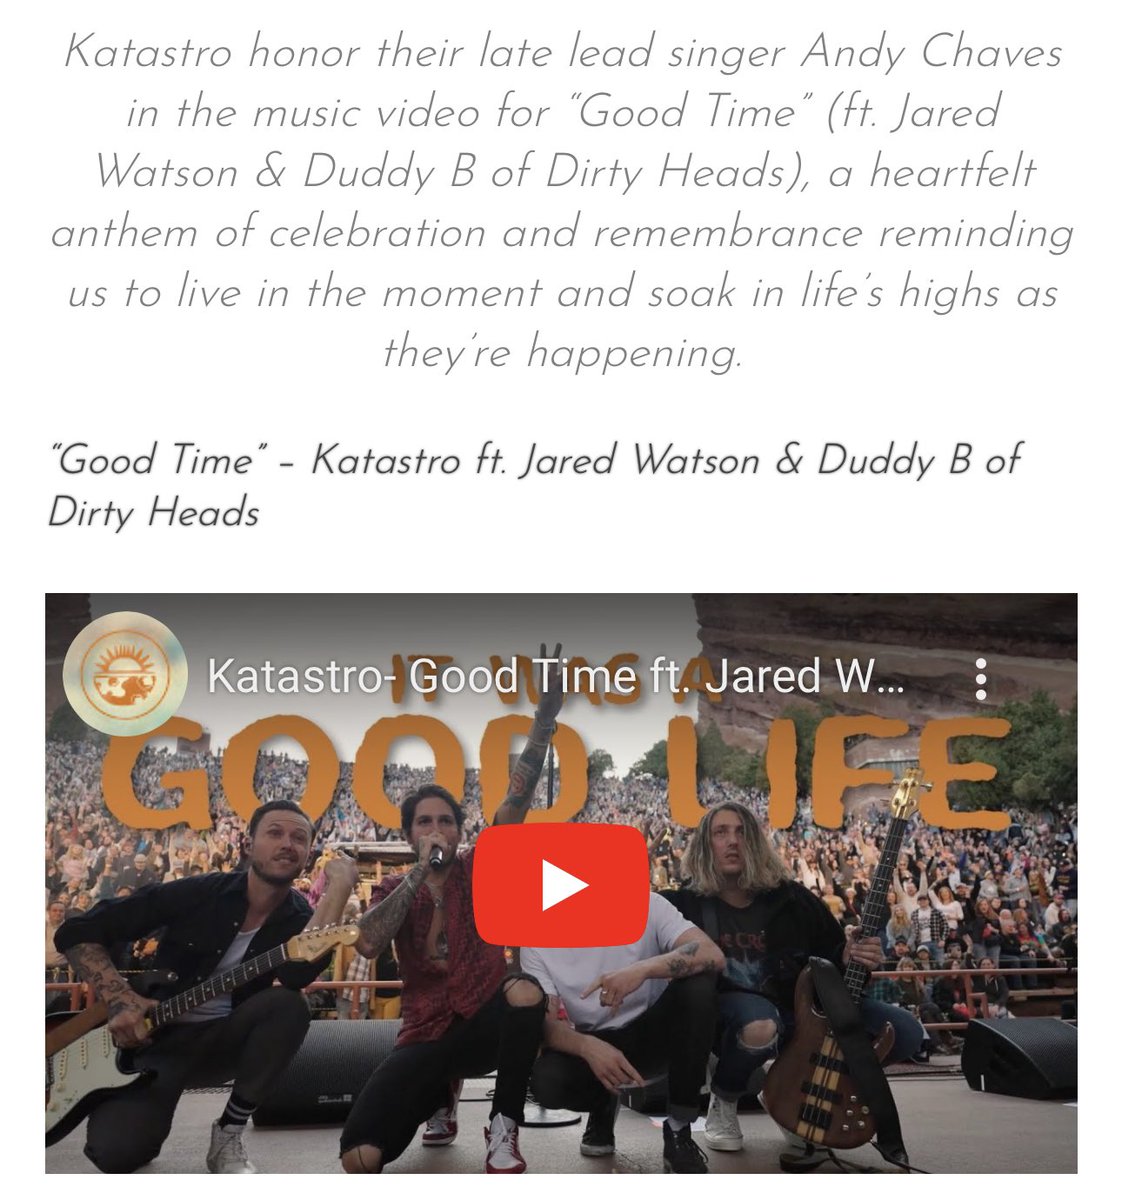 Get a first look at the “Good Time” music video - check out the premiere with @AtwoodMagazine atwoodmagazine.com/ktgt-katastro-…